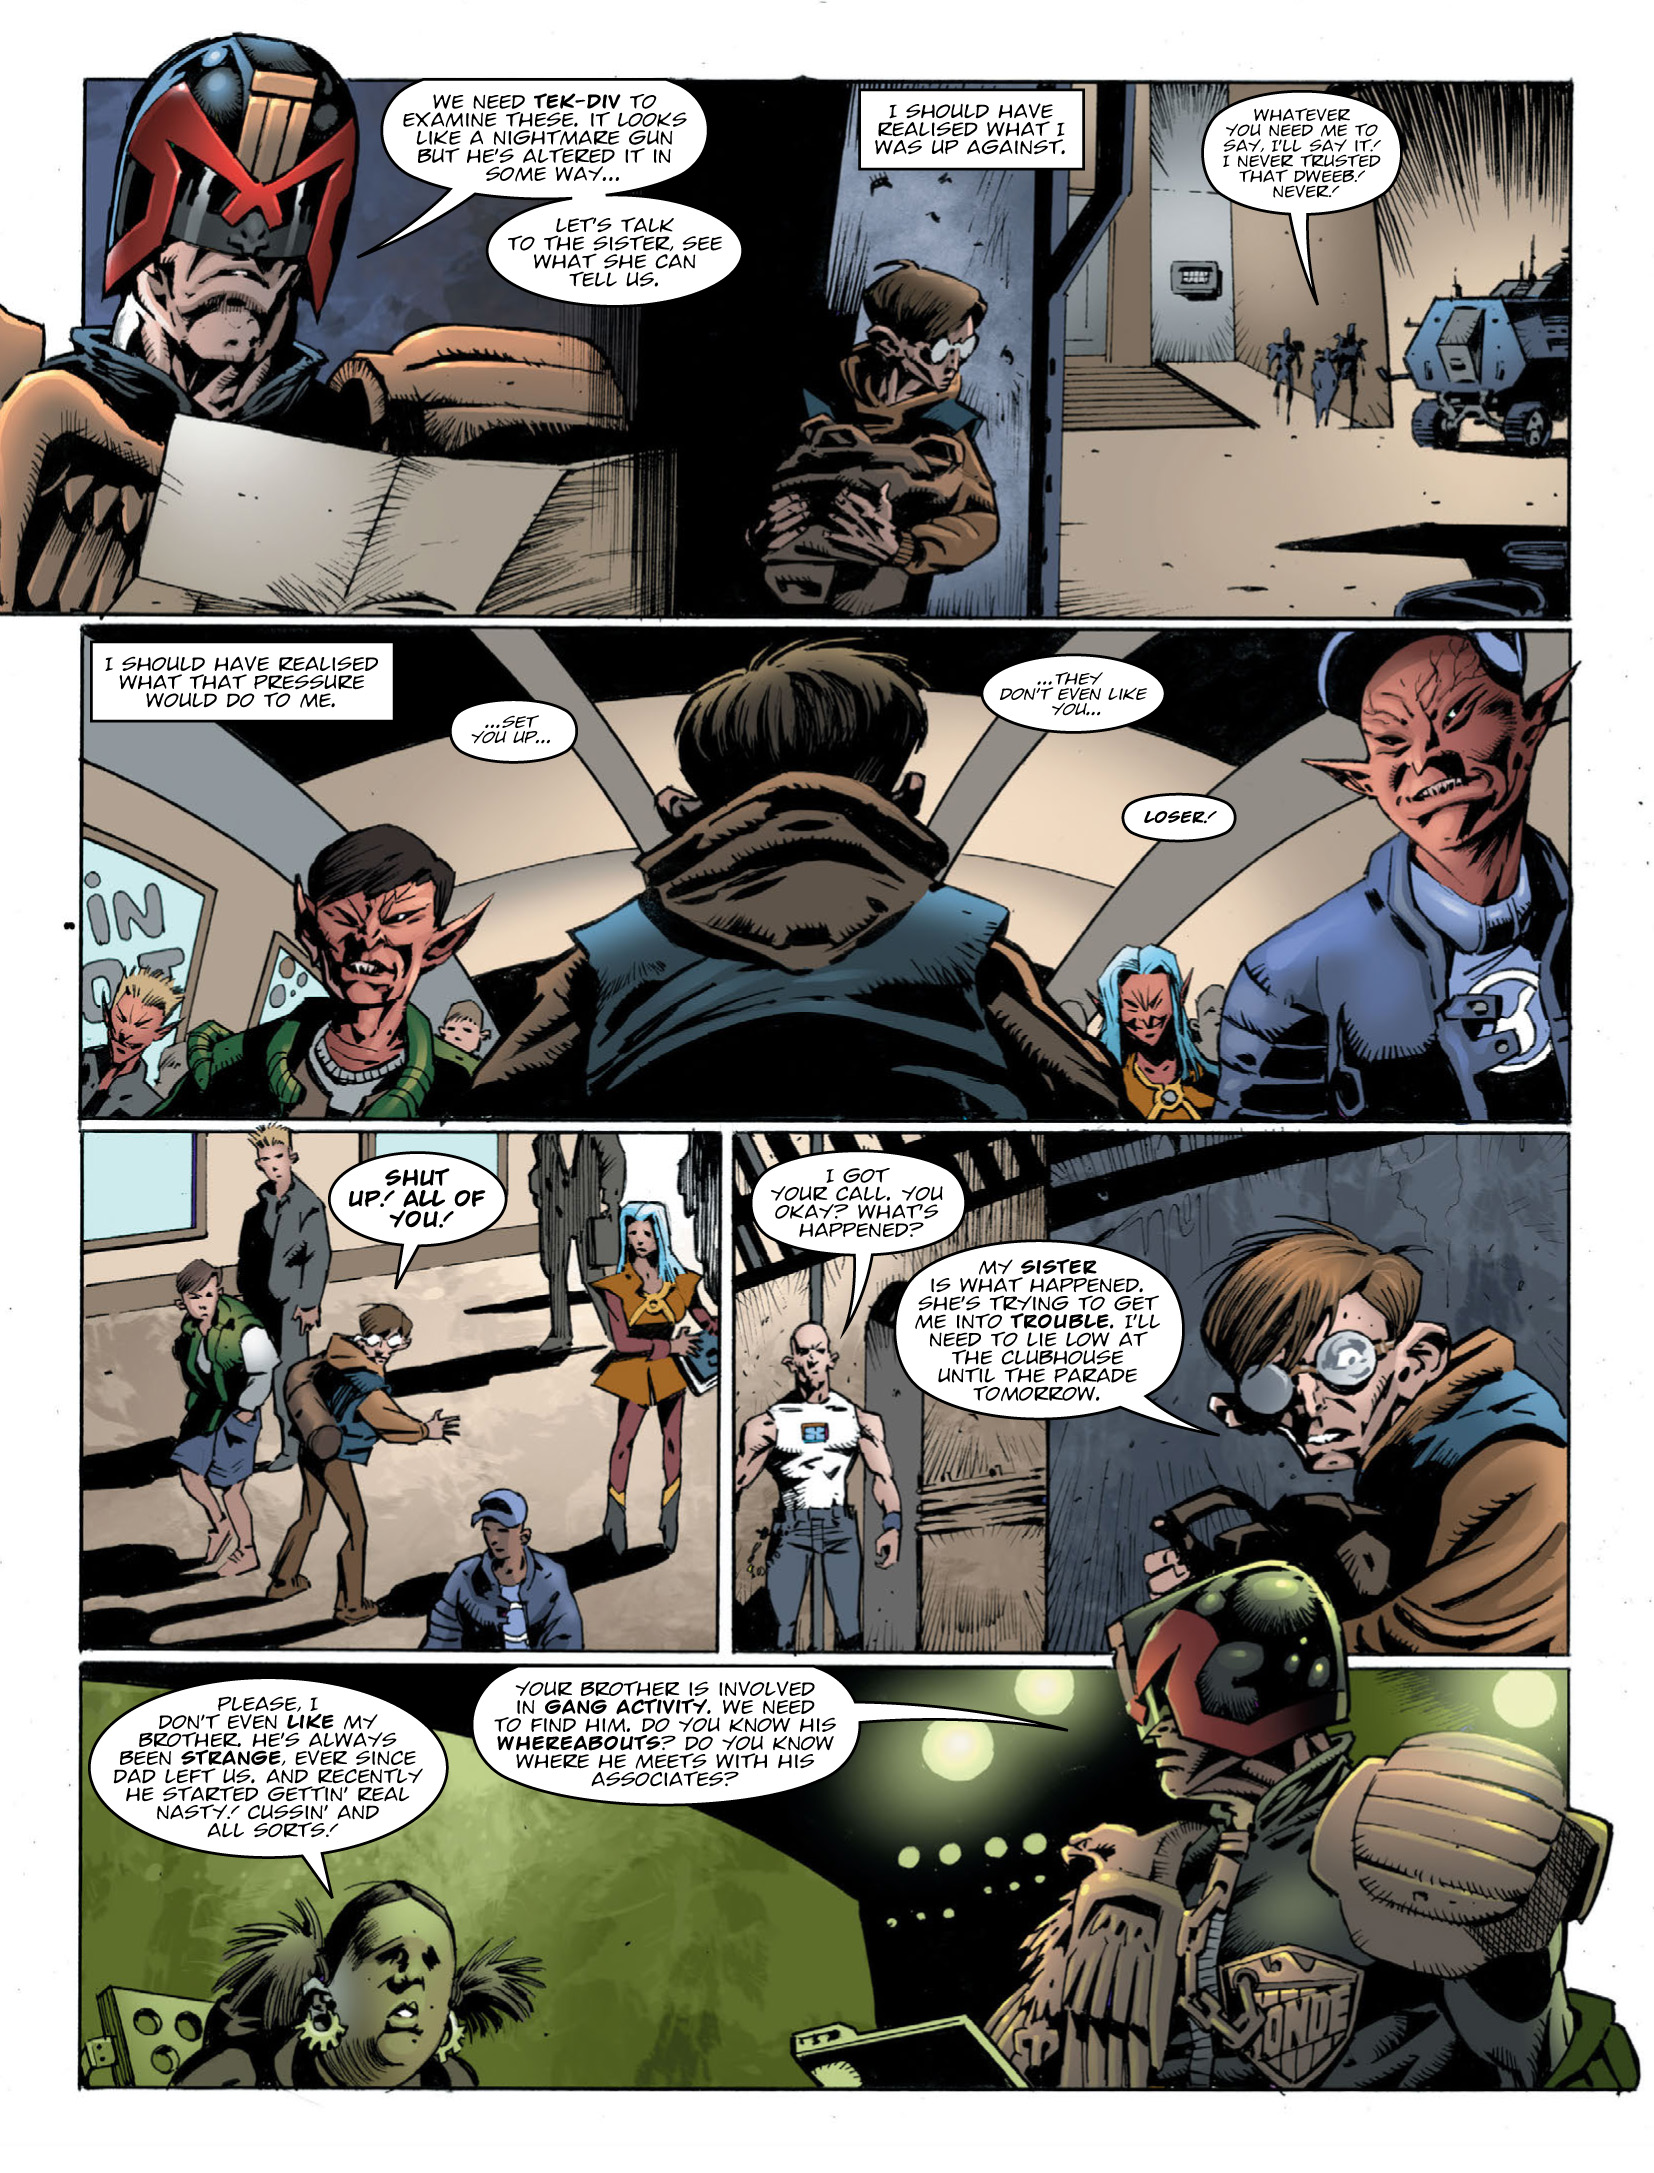 2000 AD: Chapter 2032 - Page 4